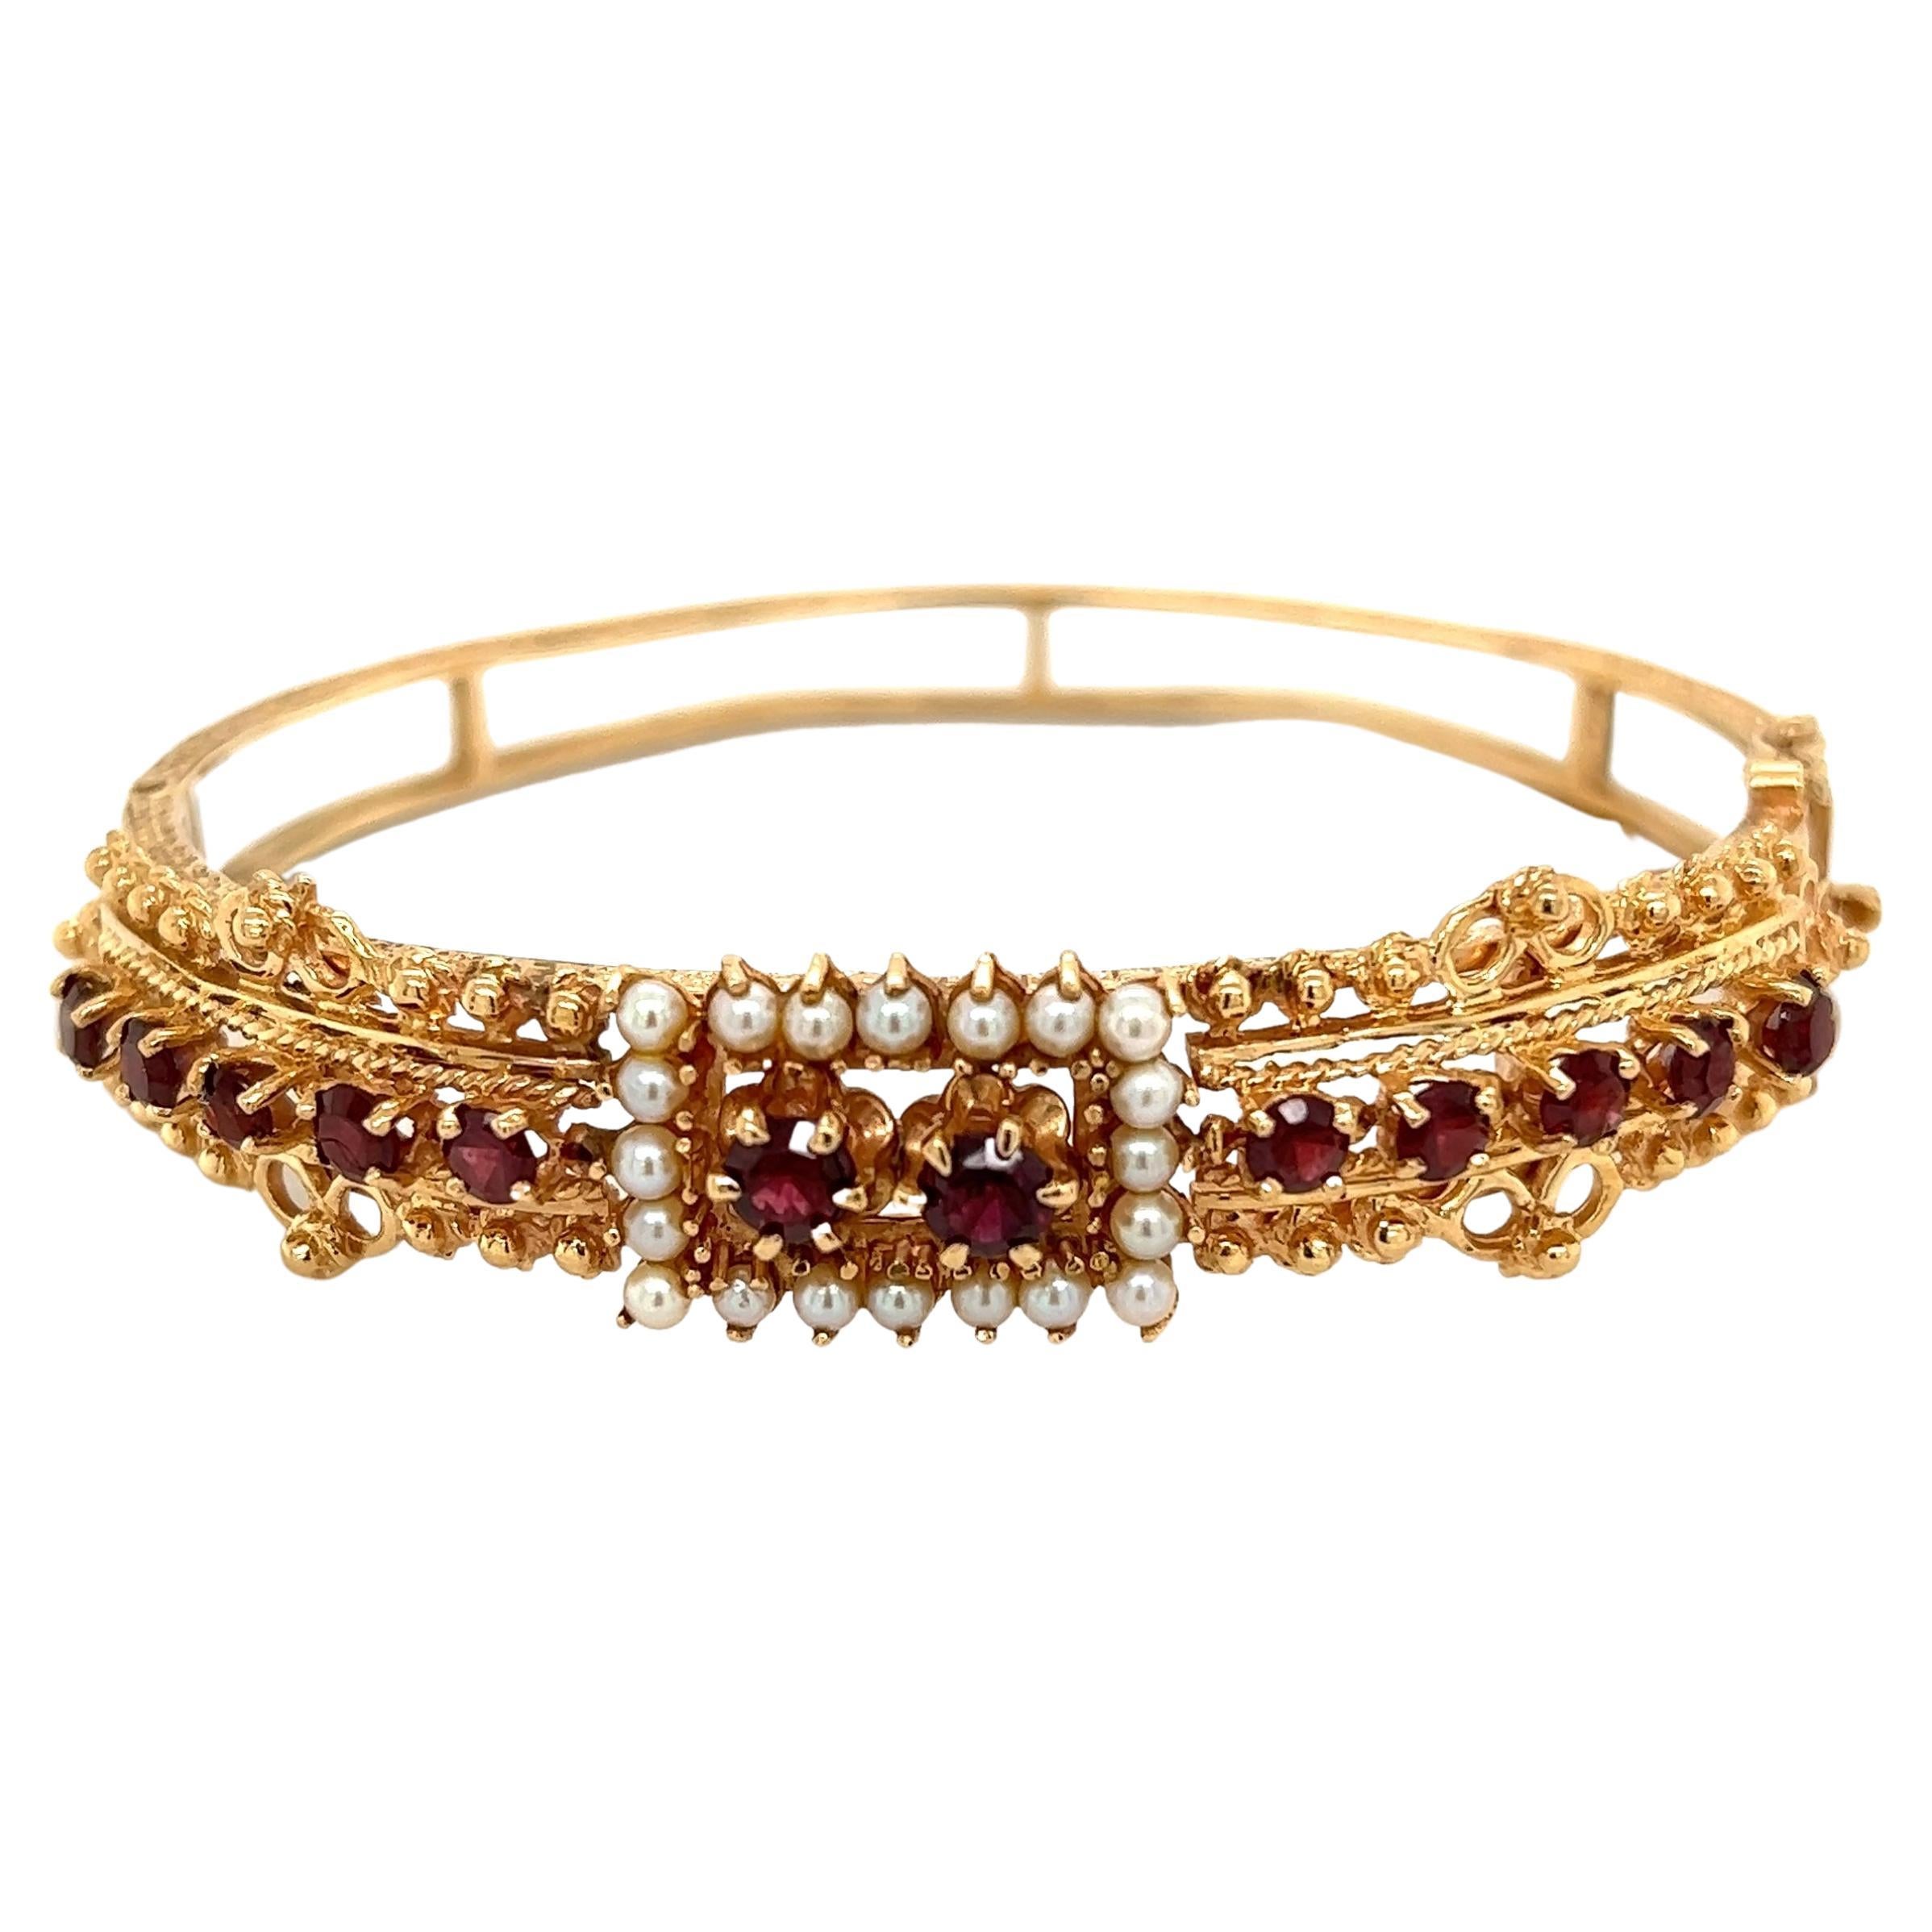 Garnet and Seed Pearl Victorian Revival Gold Cuff Bangle Bracelet